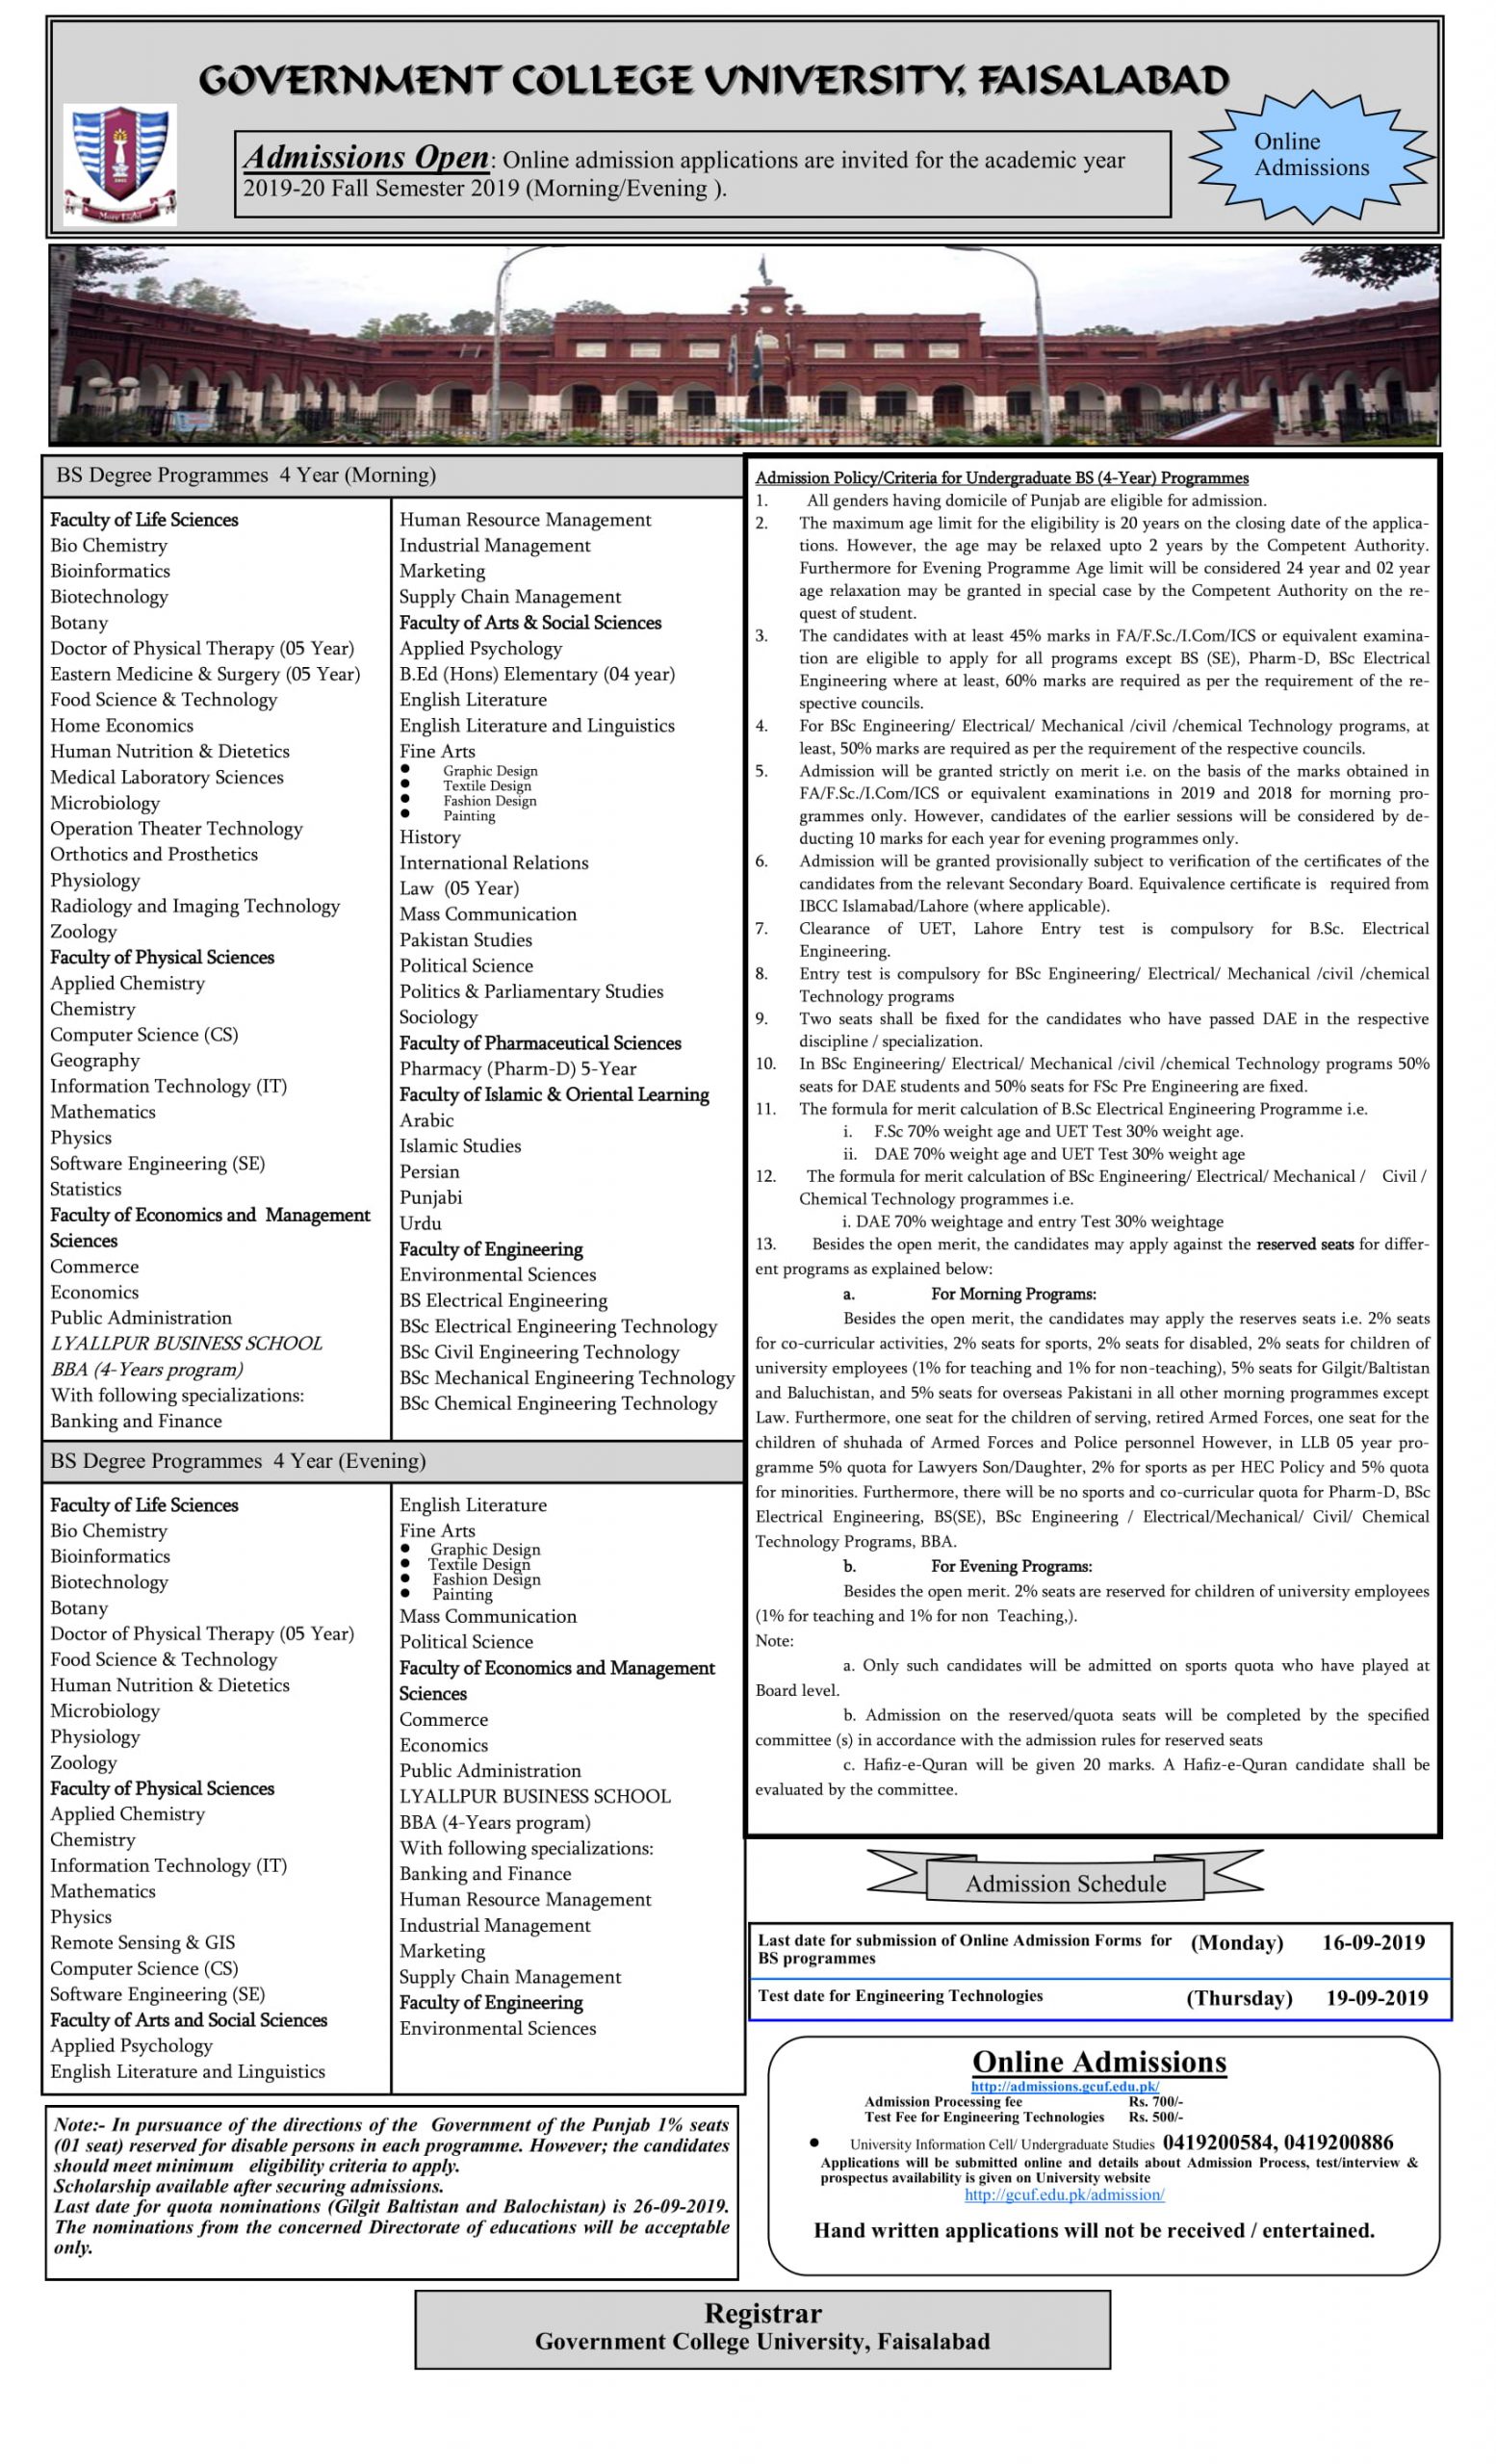 Government College University, Faisalabad BS Degree Programmes (Fall 2019)